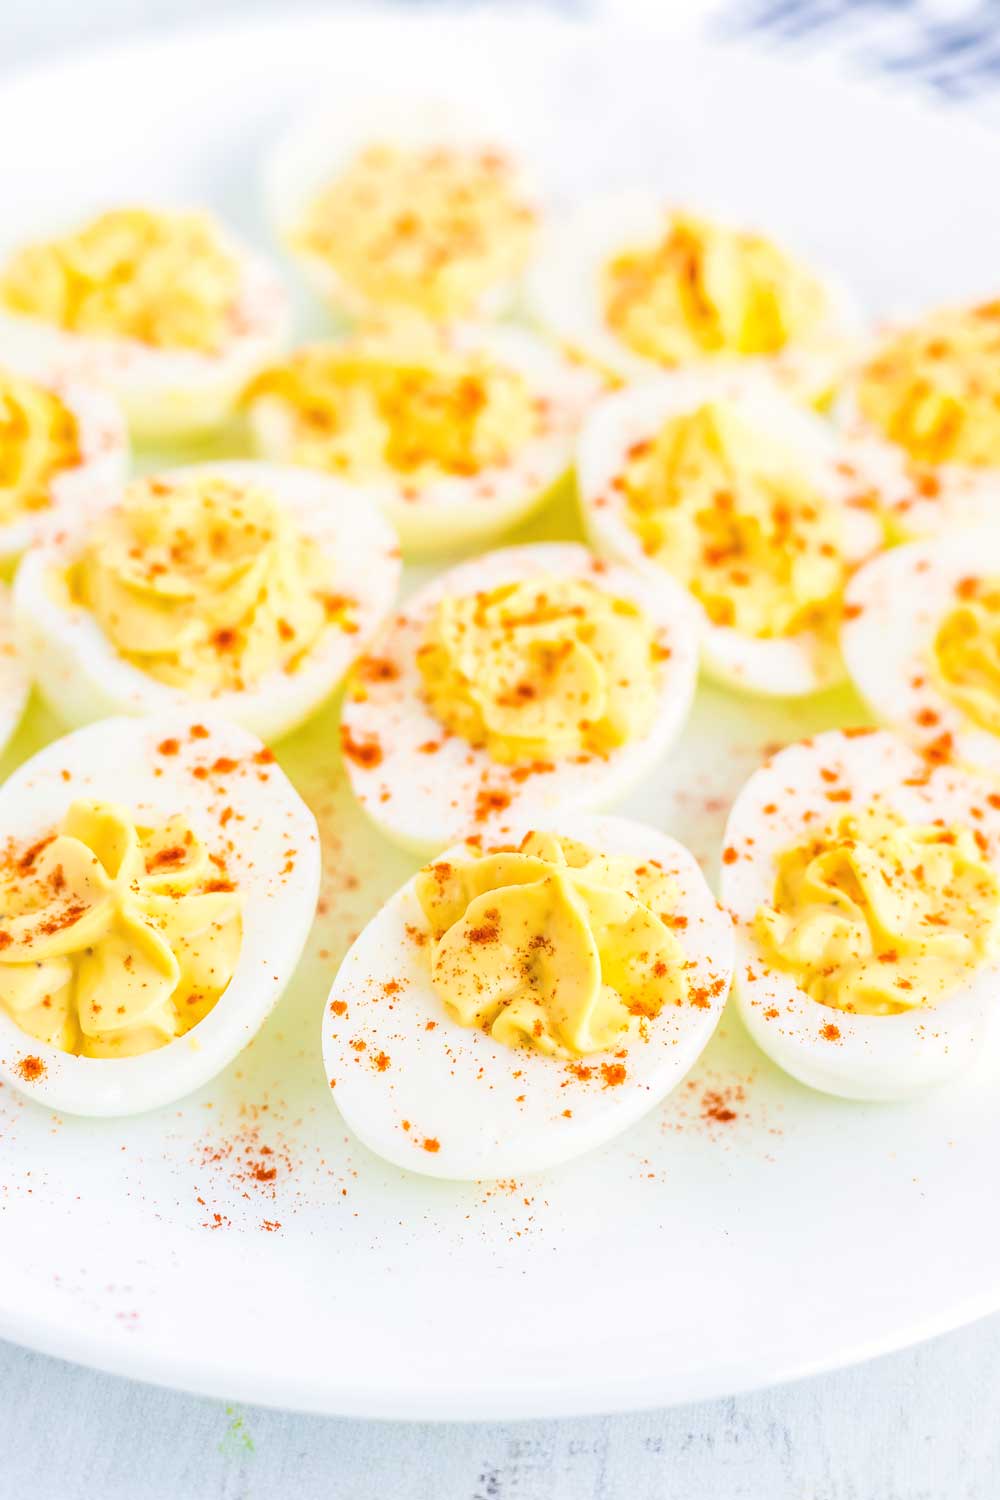 A close-up of rows of Deviled Eggs